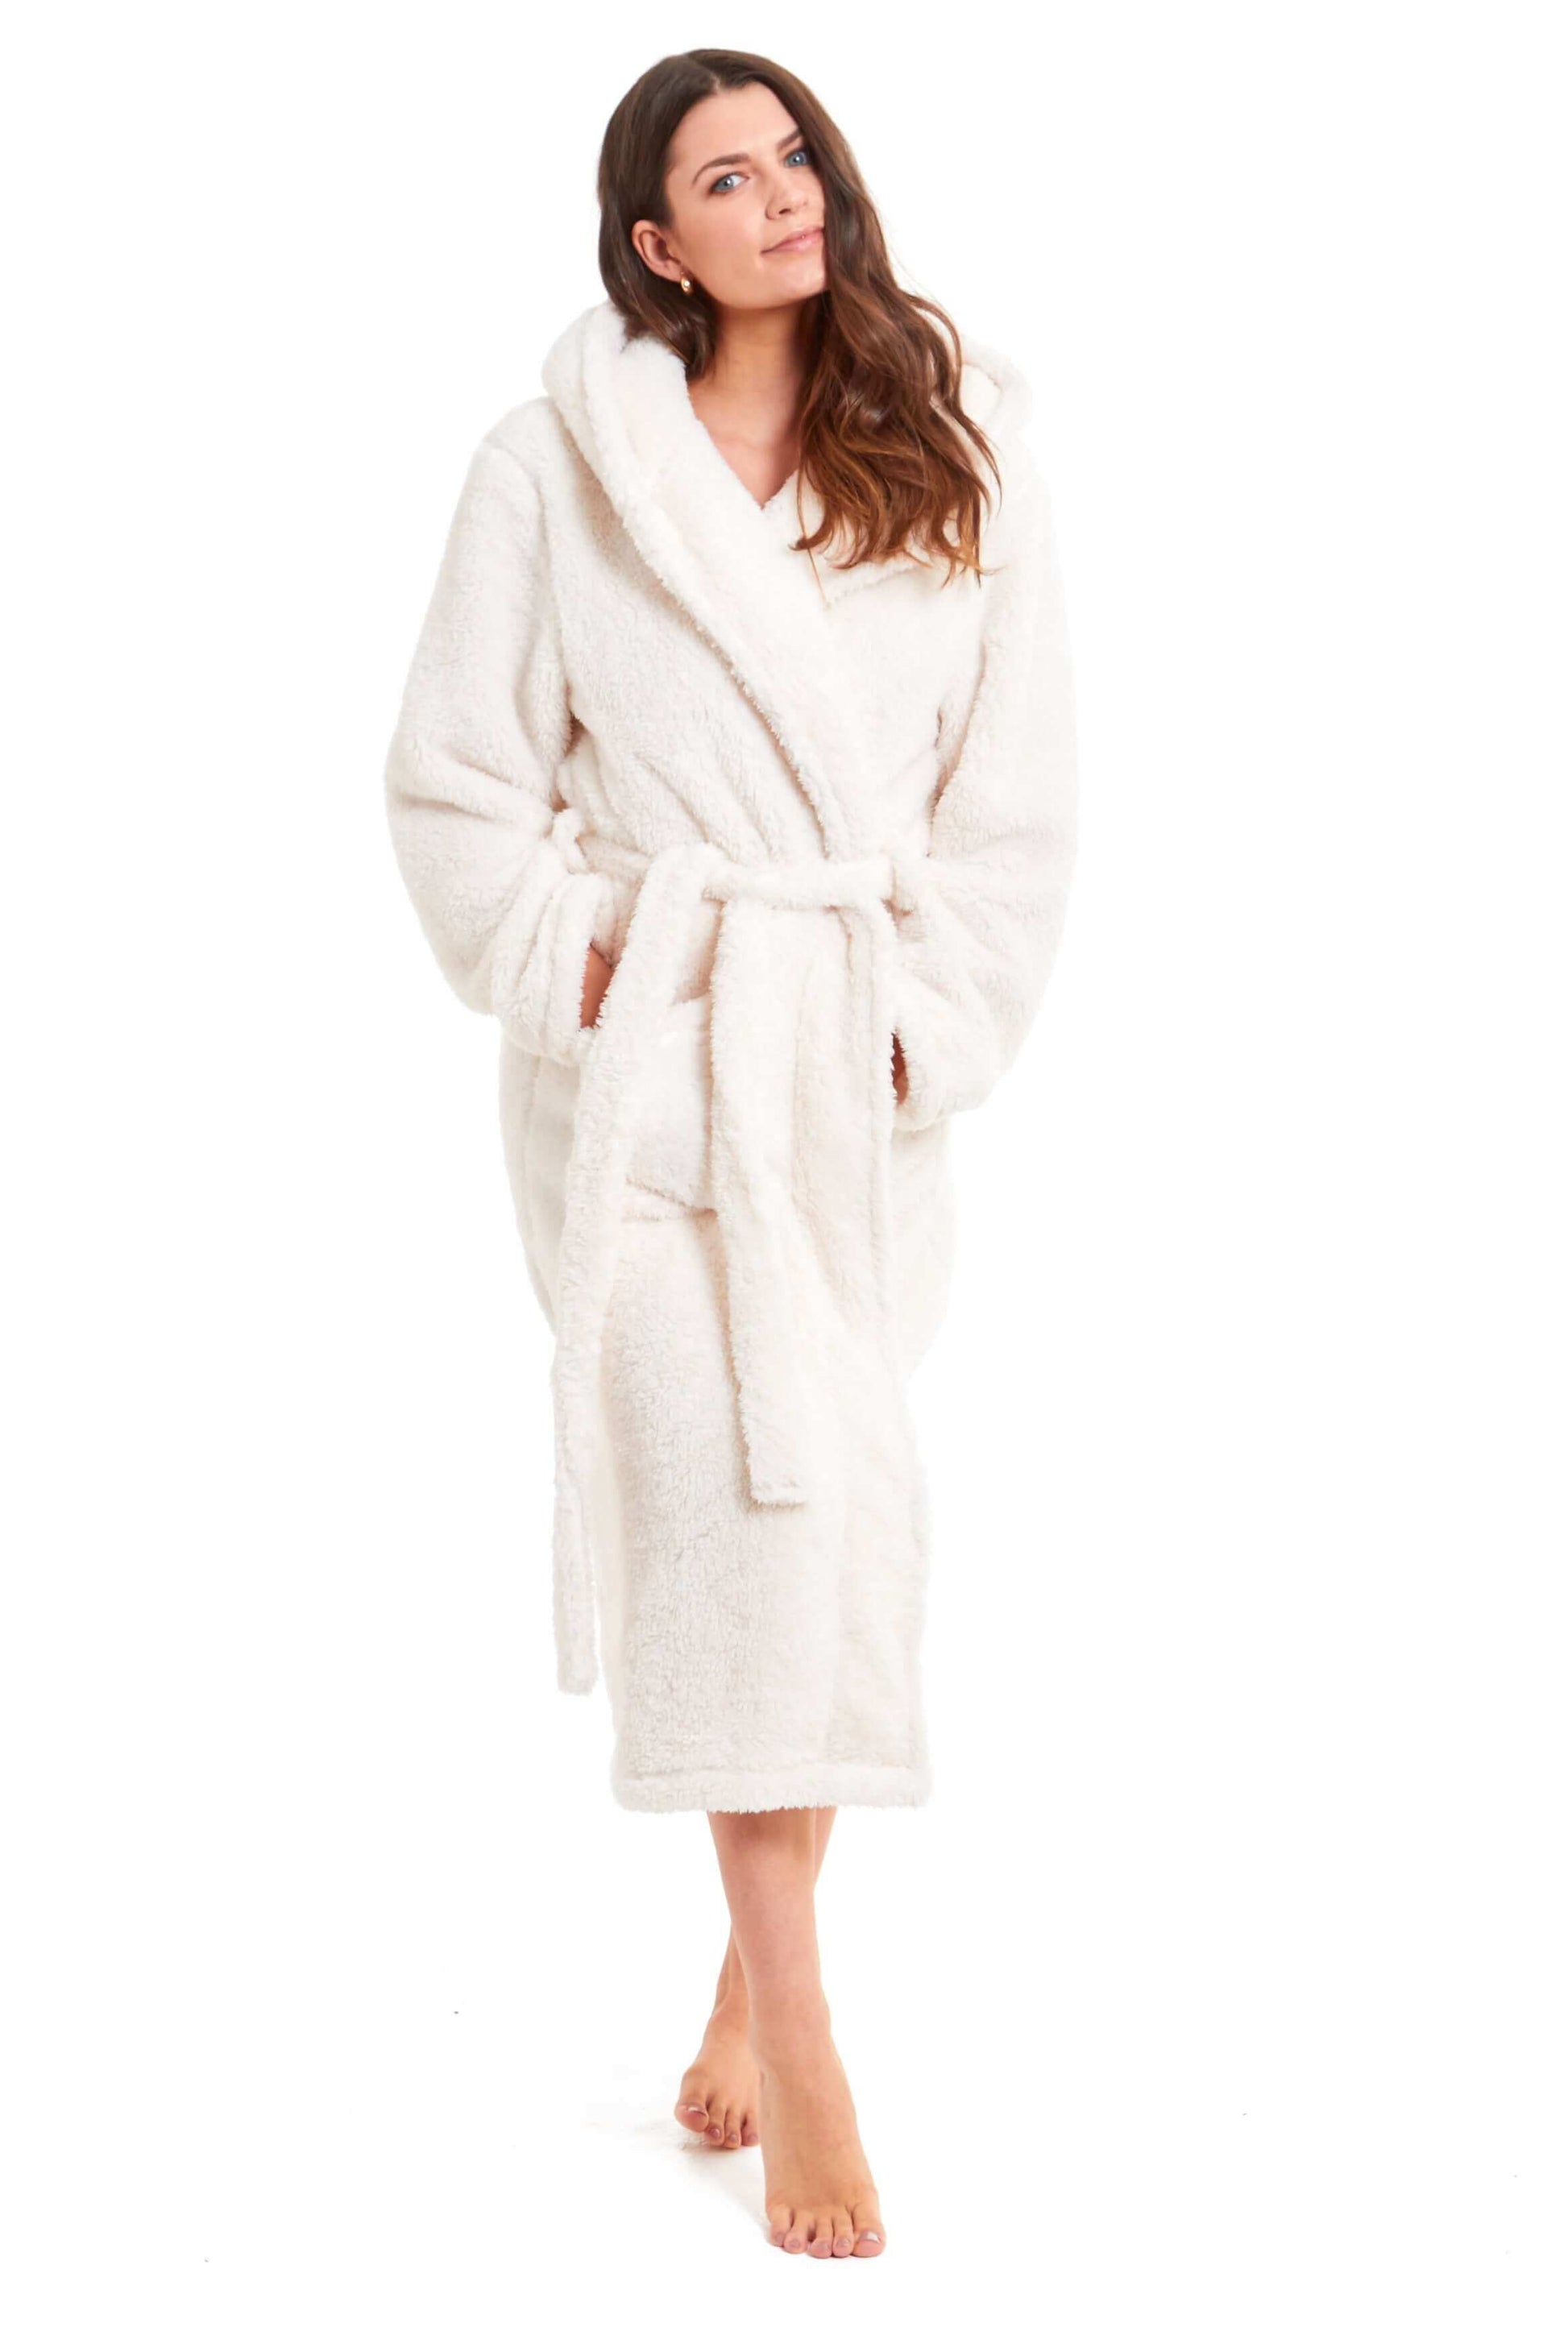 Women's Cream Snuggle Fleece Dressing Gown, Ladies Robes. Buy now for £25.00. A Robe by Daisy Dreamer. bath robe, bathrobe, cream, daisy dreamer, fleece, Fleece Pyjama, hooded robe, ladies, long sleeve, loungewear, natural, nightwear, polyester, robe, sle